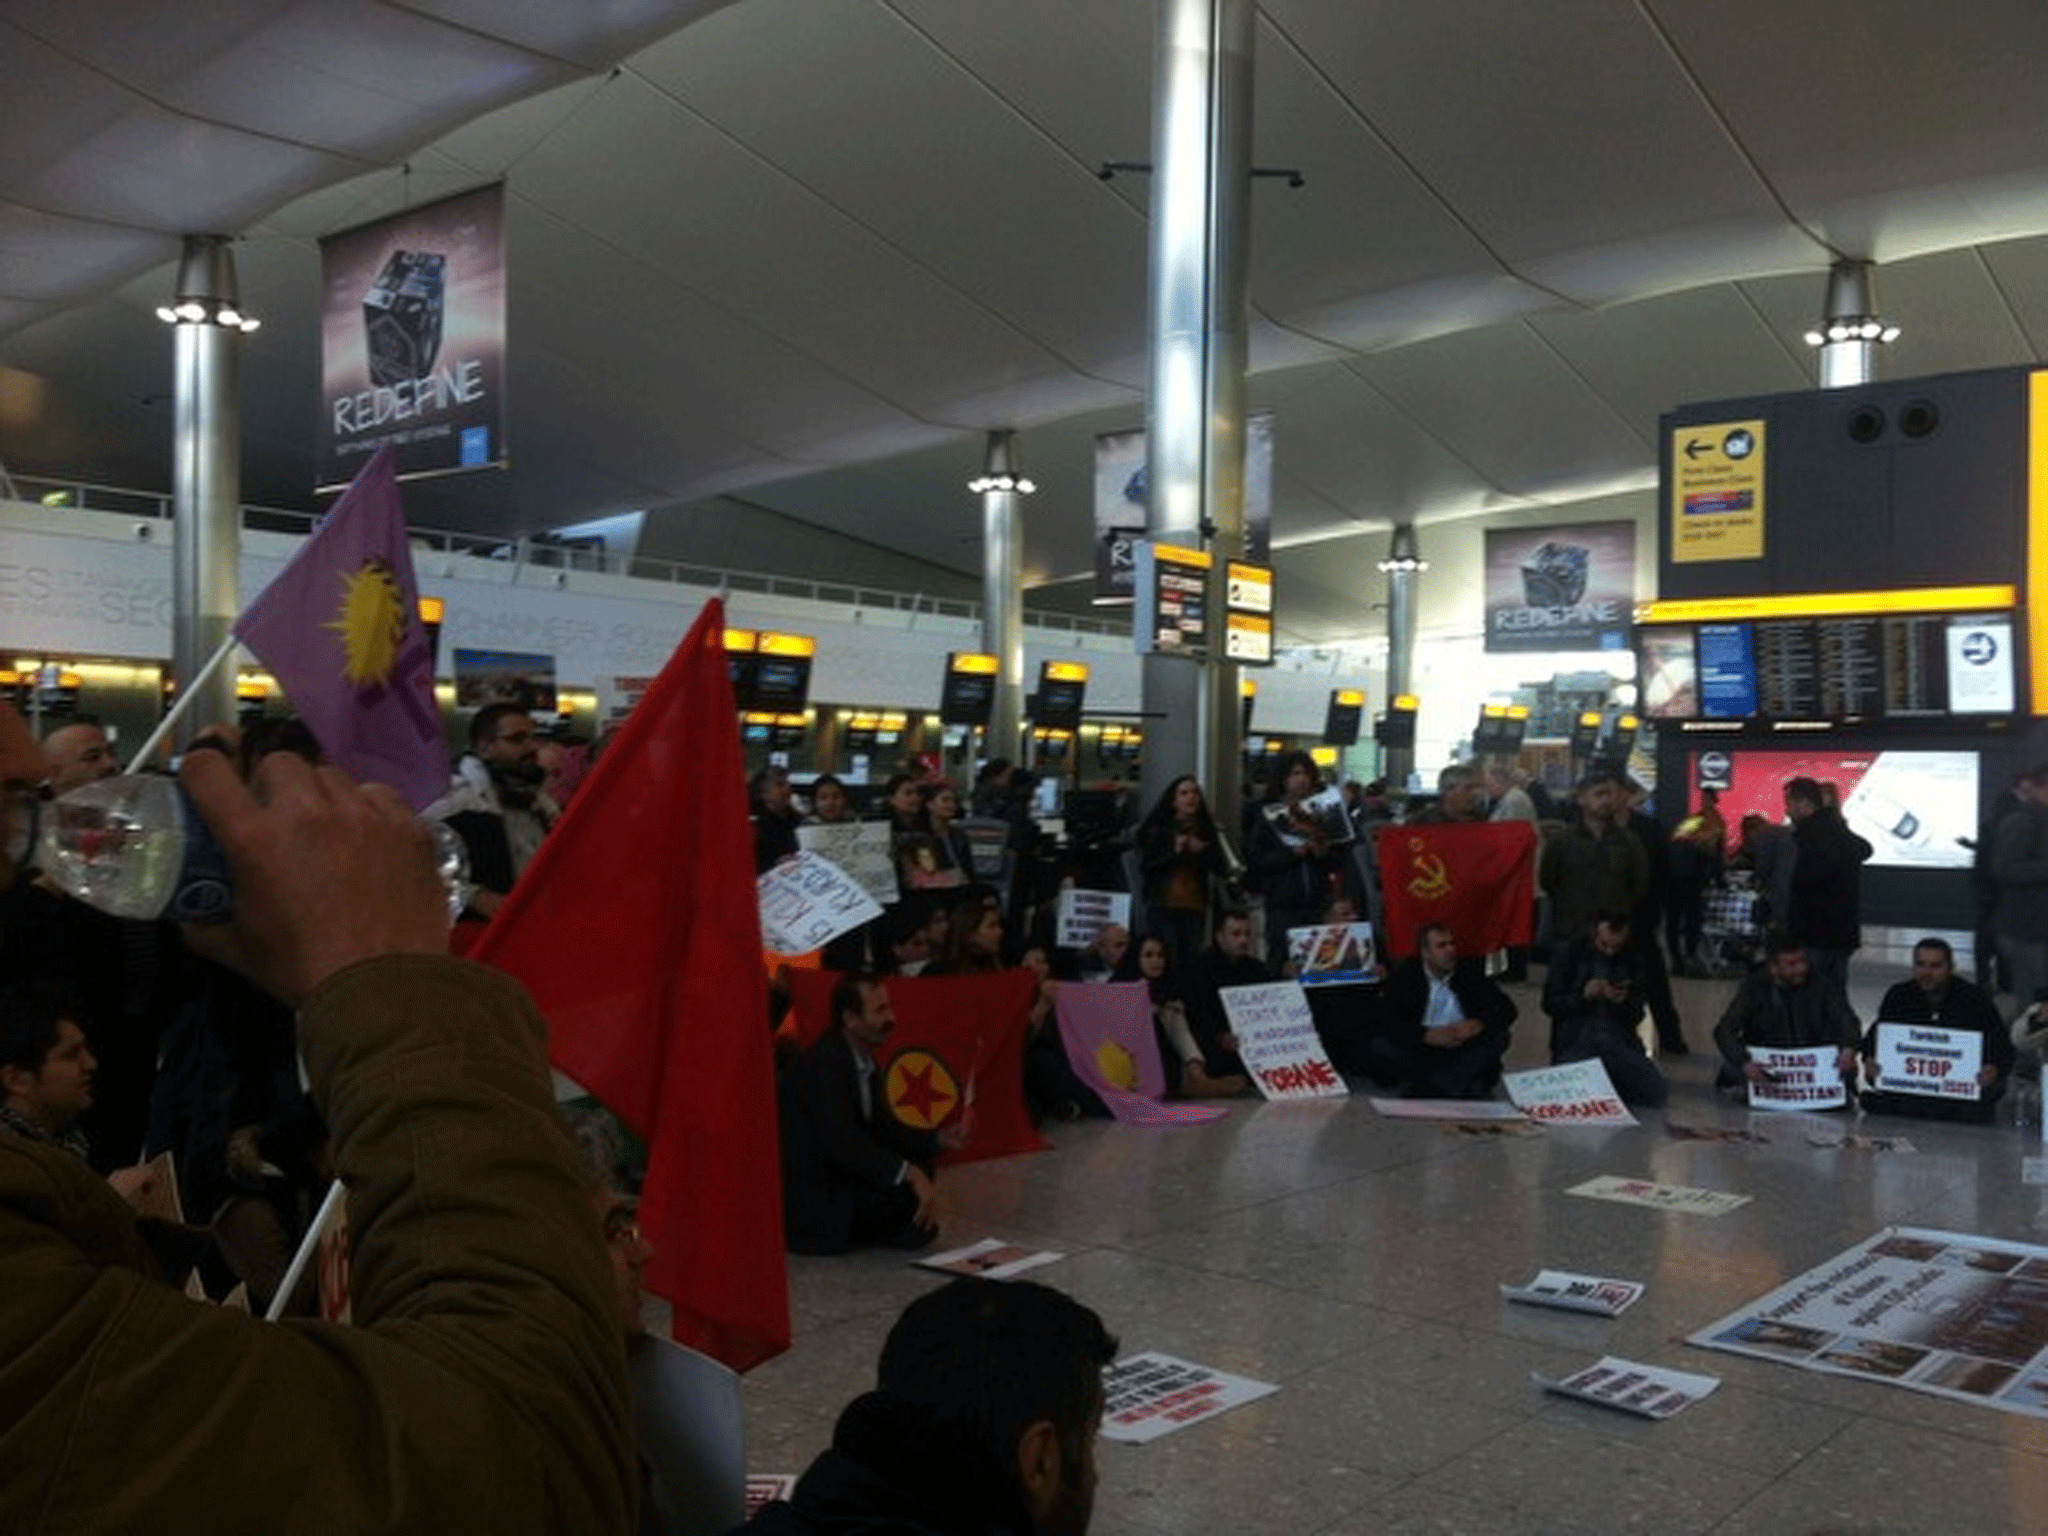 Kurdish protesters gather at Heathrow Airport as anti-Isis demonstrations take place across Europe